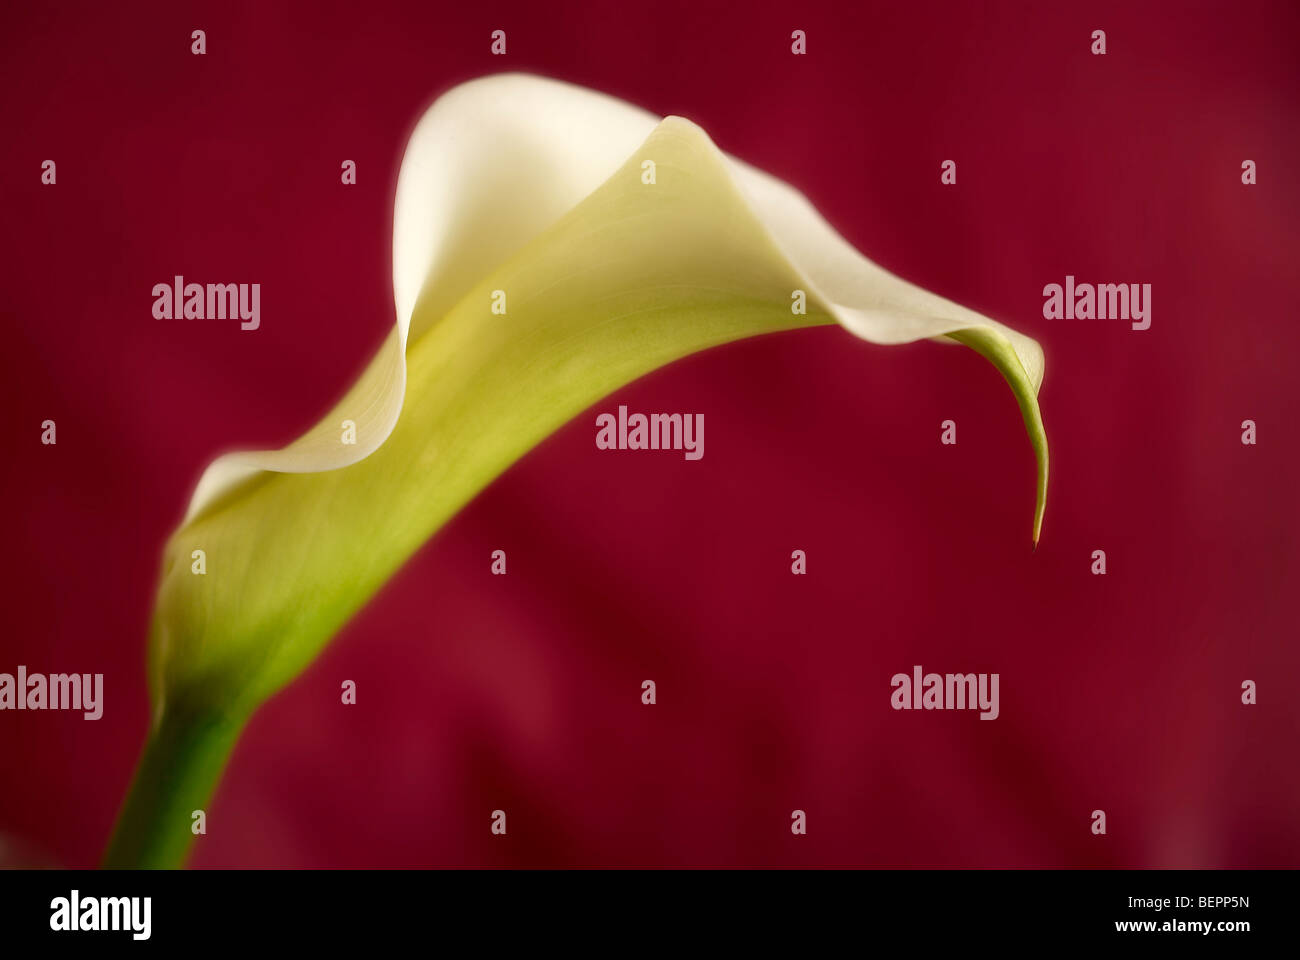 Lily, arum lily, red background, lilium, profile, one lily, flowers, flower, macro, close-up, close up, wedding Stock Photo